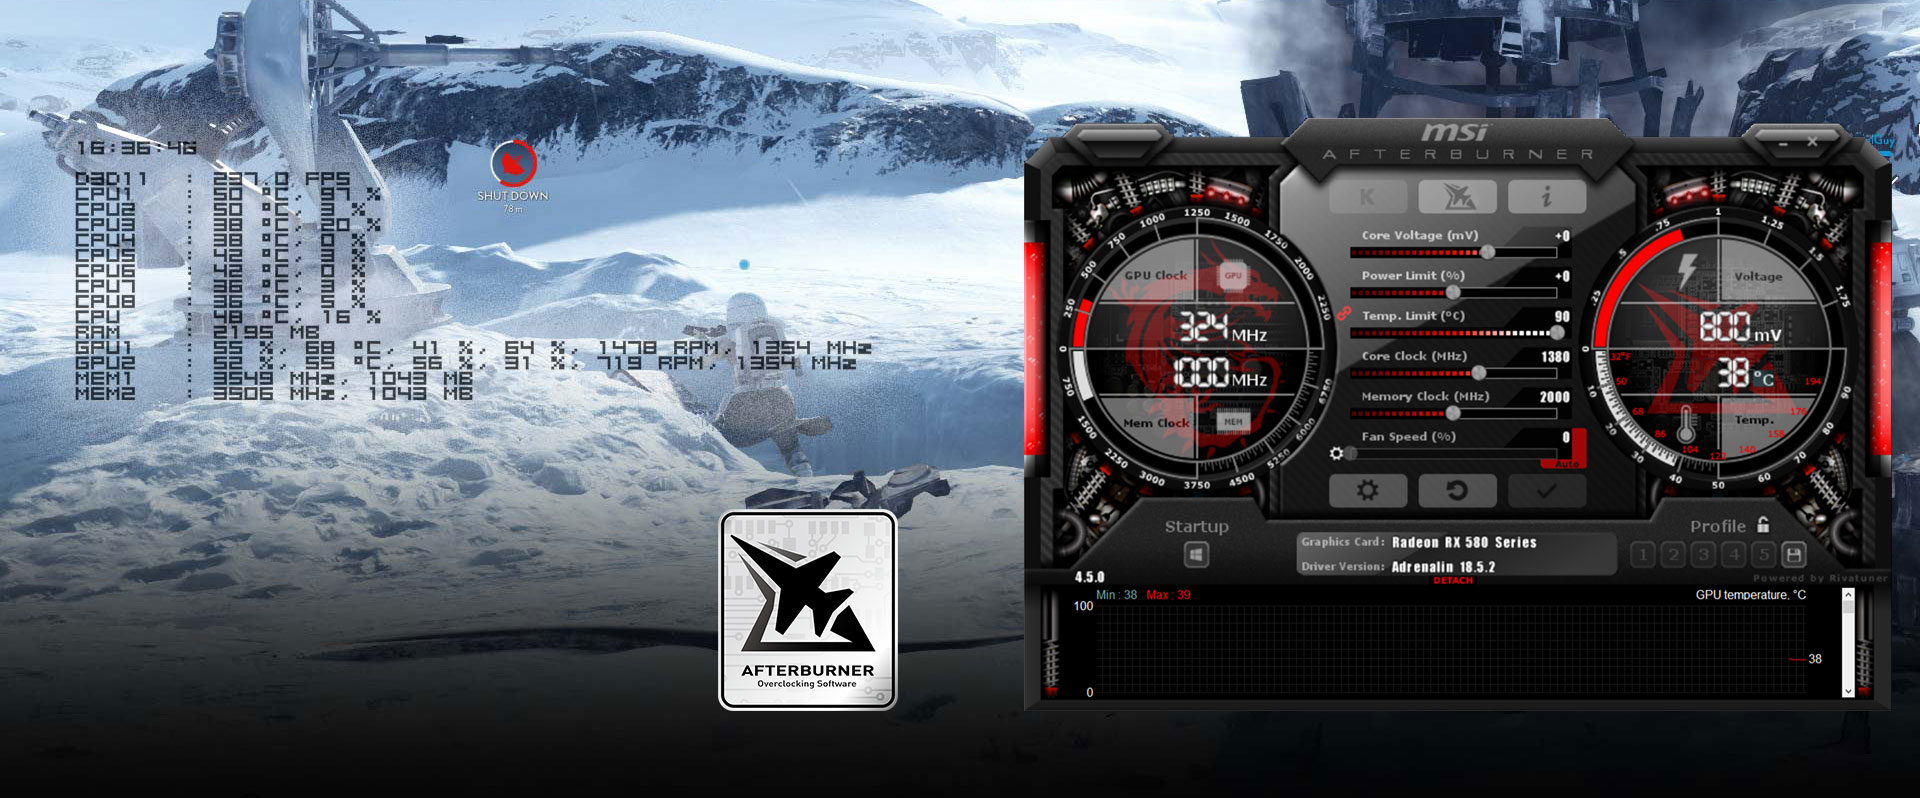  Screenshot of Afterburner, next to it on the left is the logo of Afterburner. The background is snowy mountain areas where solider are patrolling 